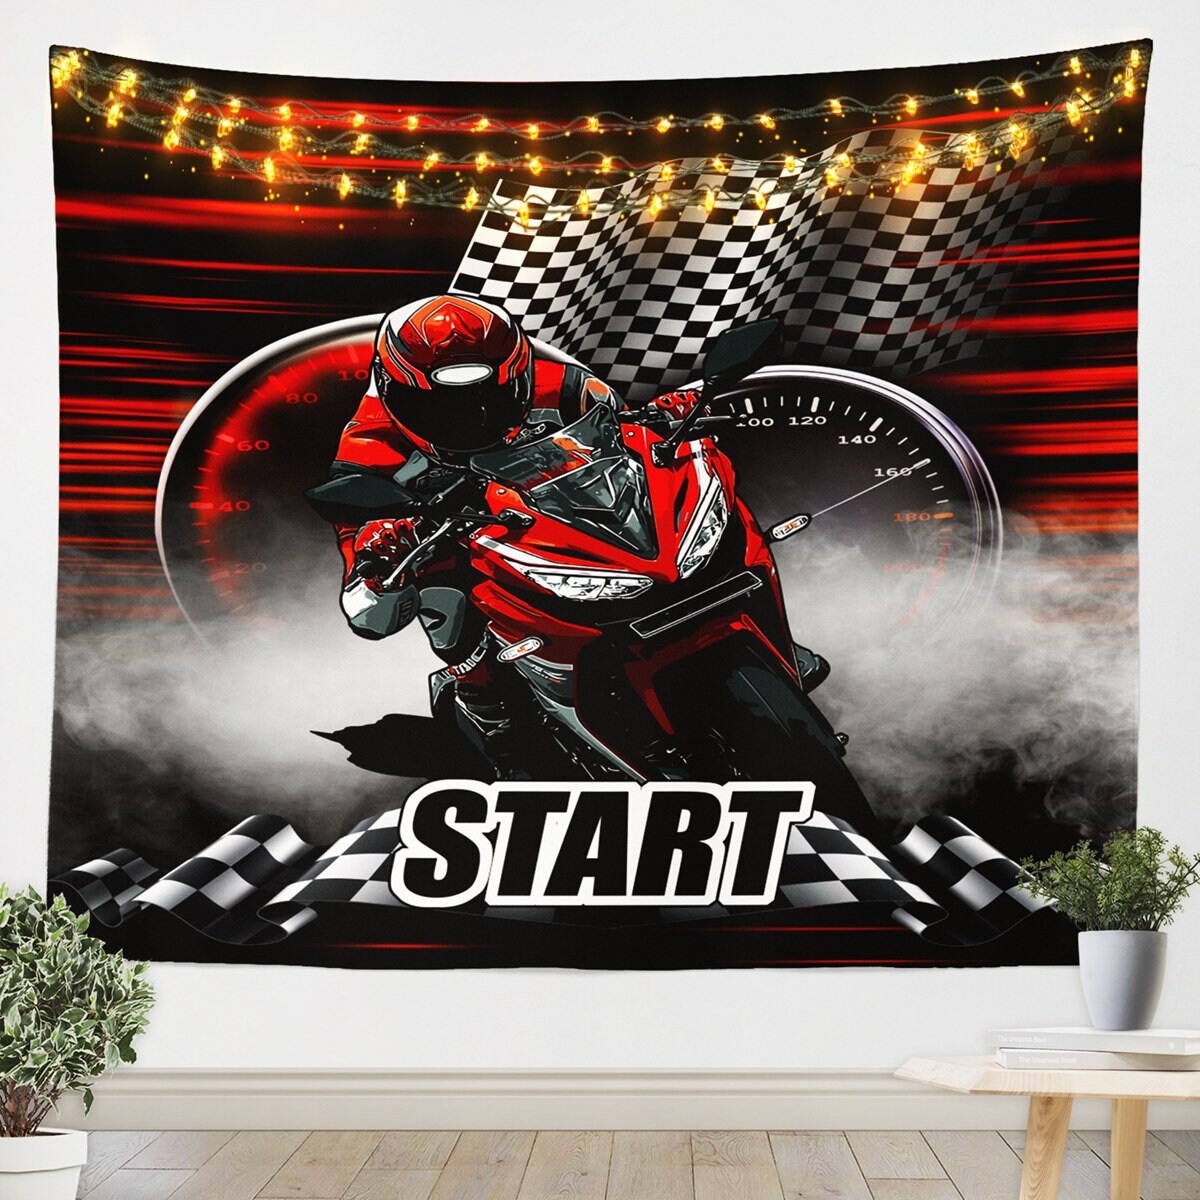 DIY Latch Hook Rugs Kits for Adults Beginners Kids Children with Pattern  Printed Motorcycle Canvas Rug